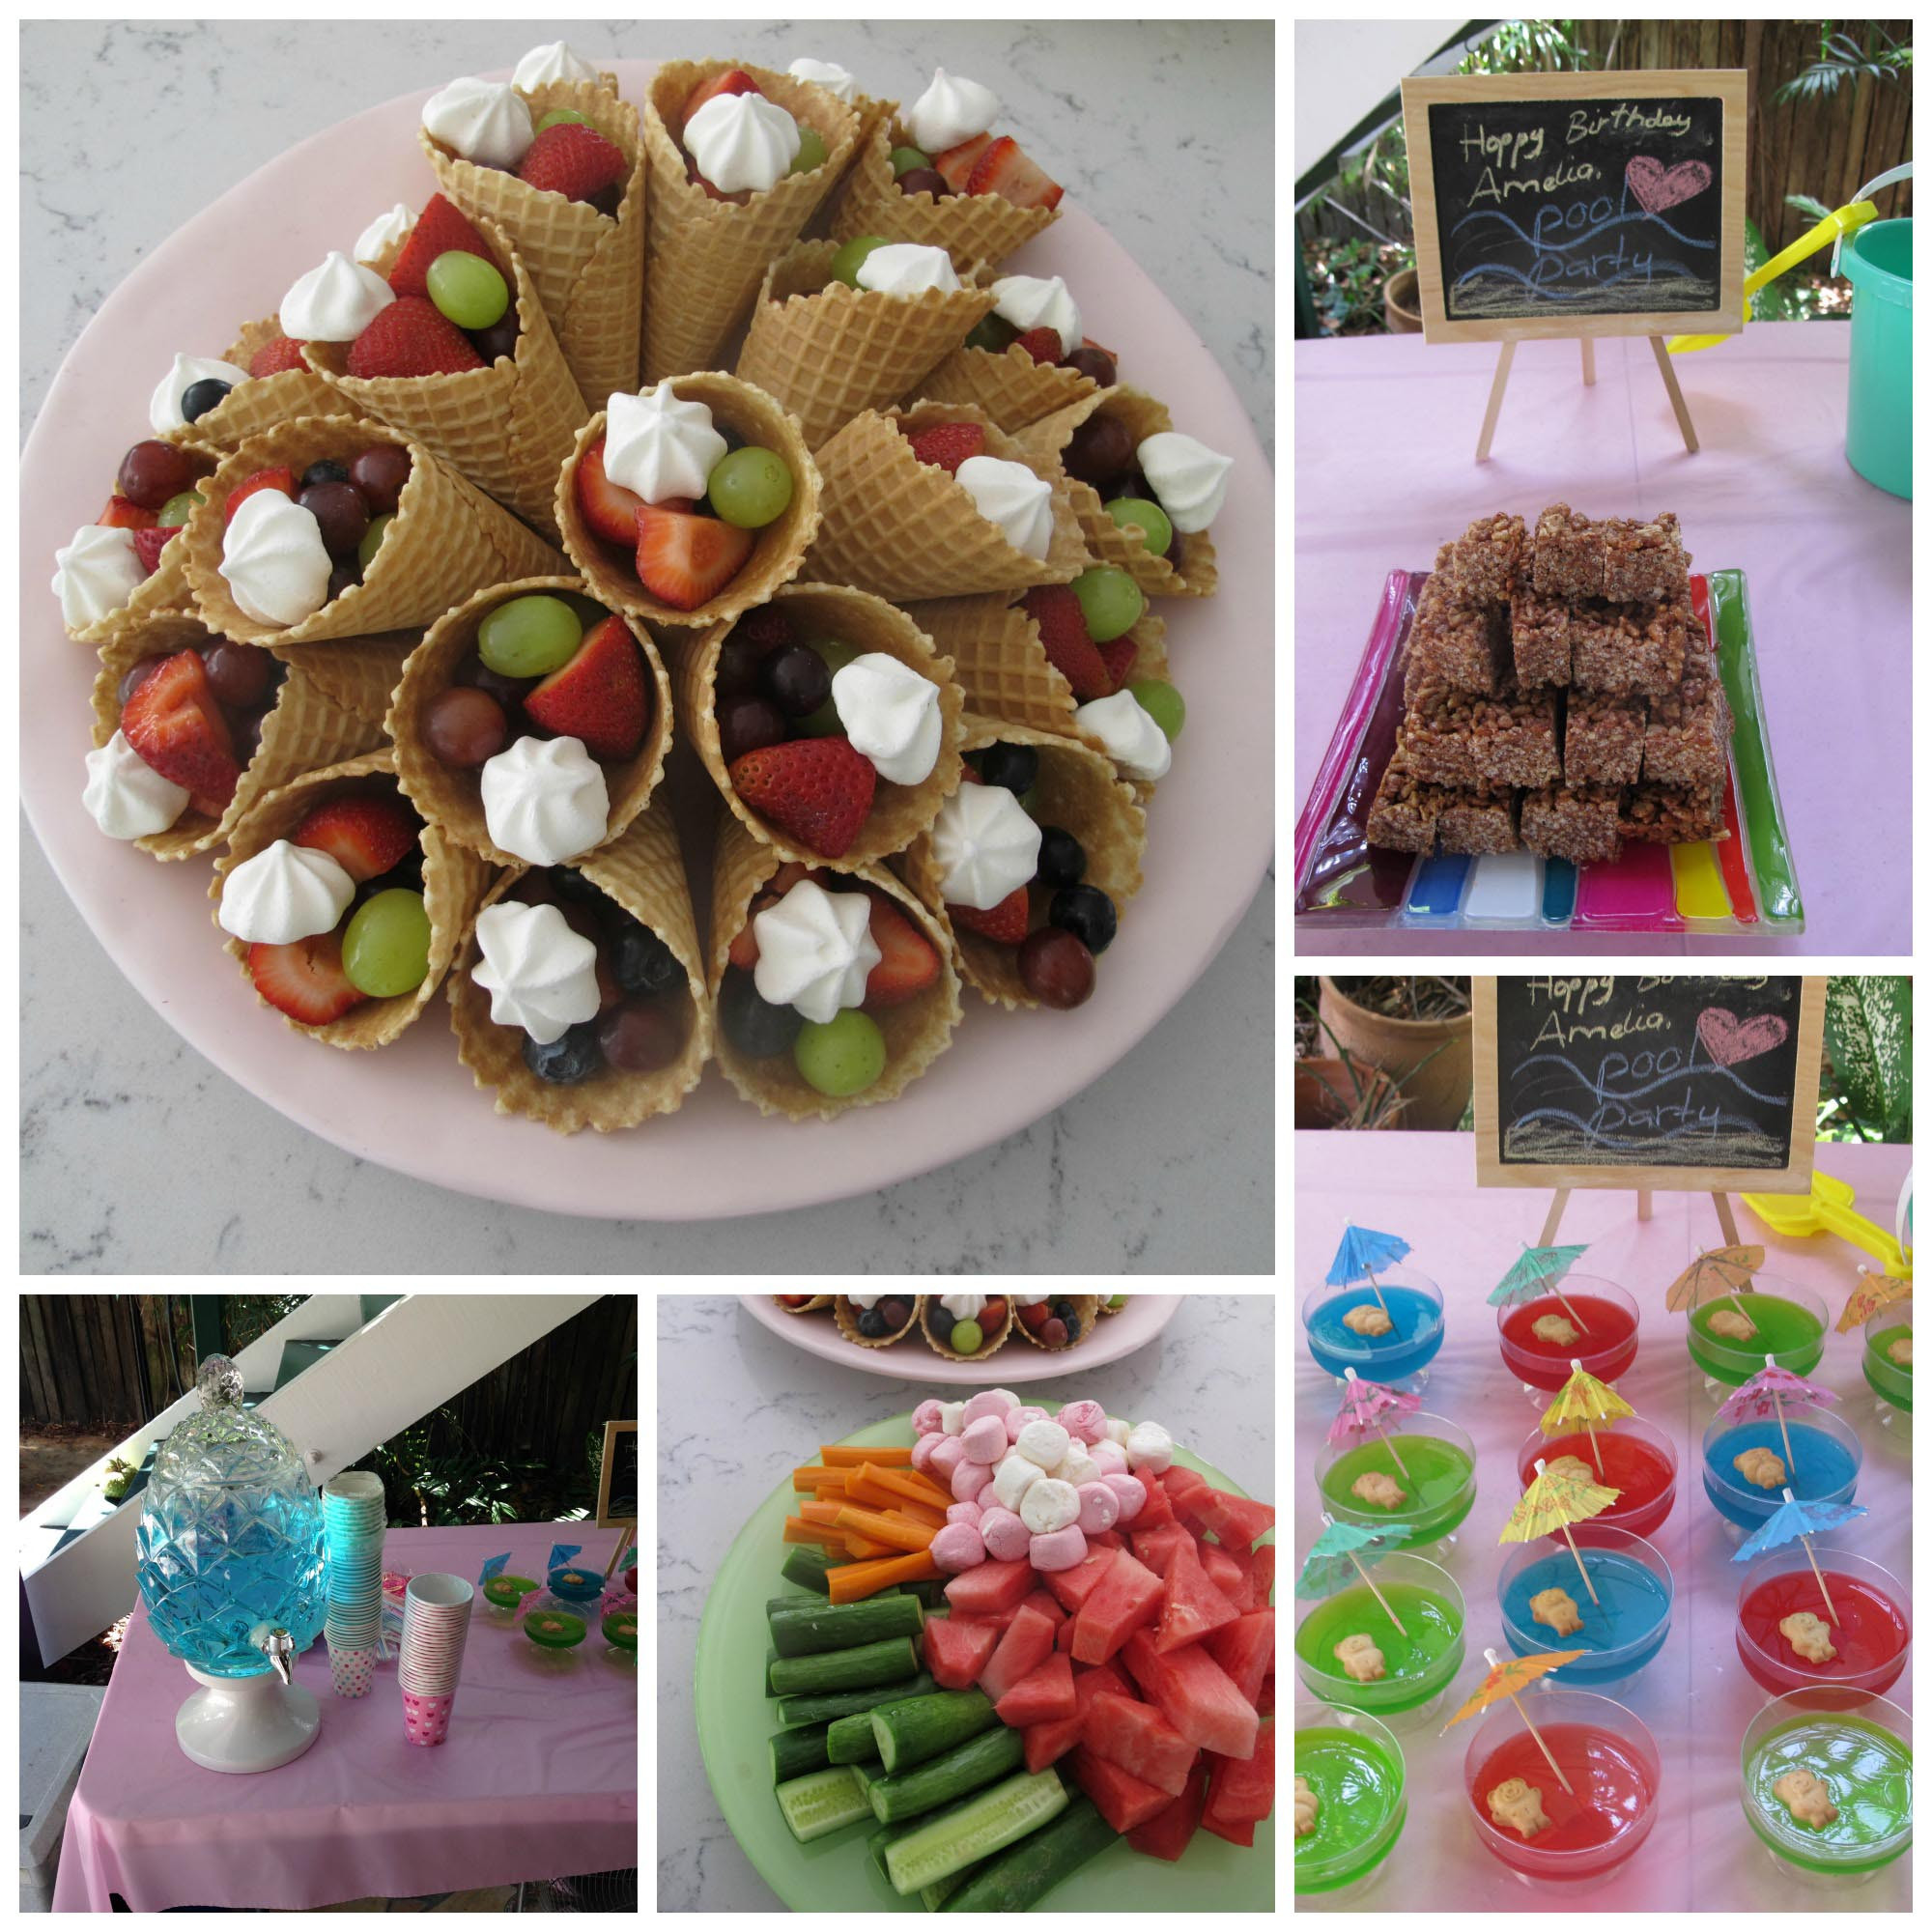 Toddler Party Food Ideas
 The Perfect Kids Pool Party